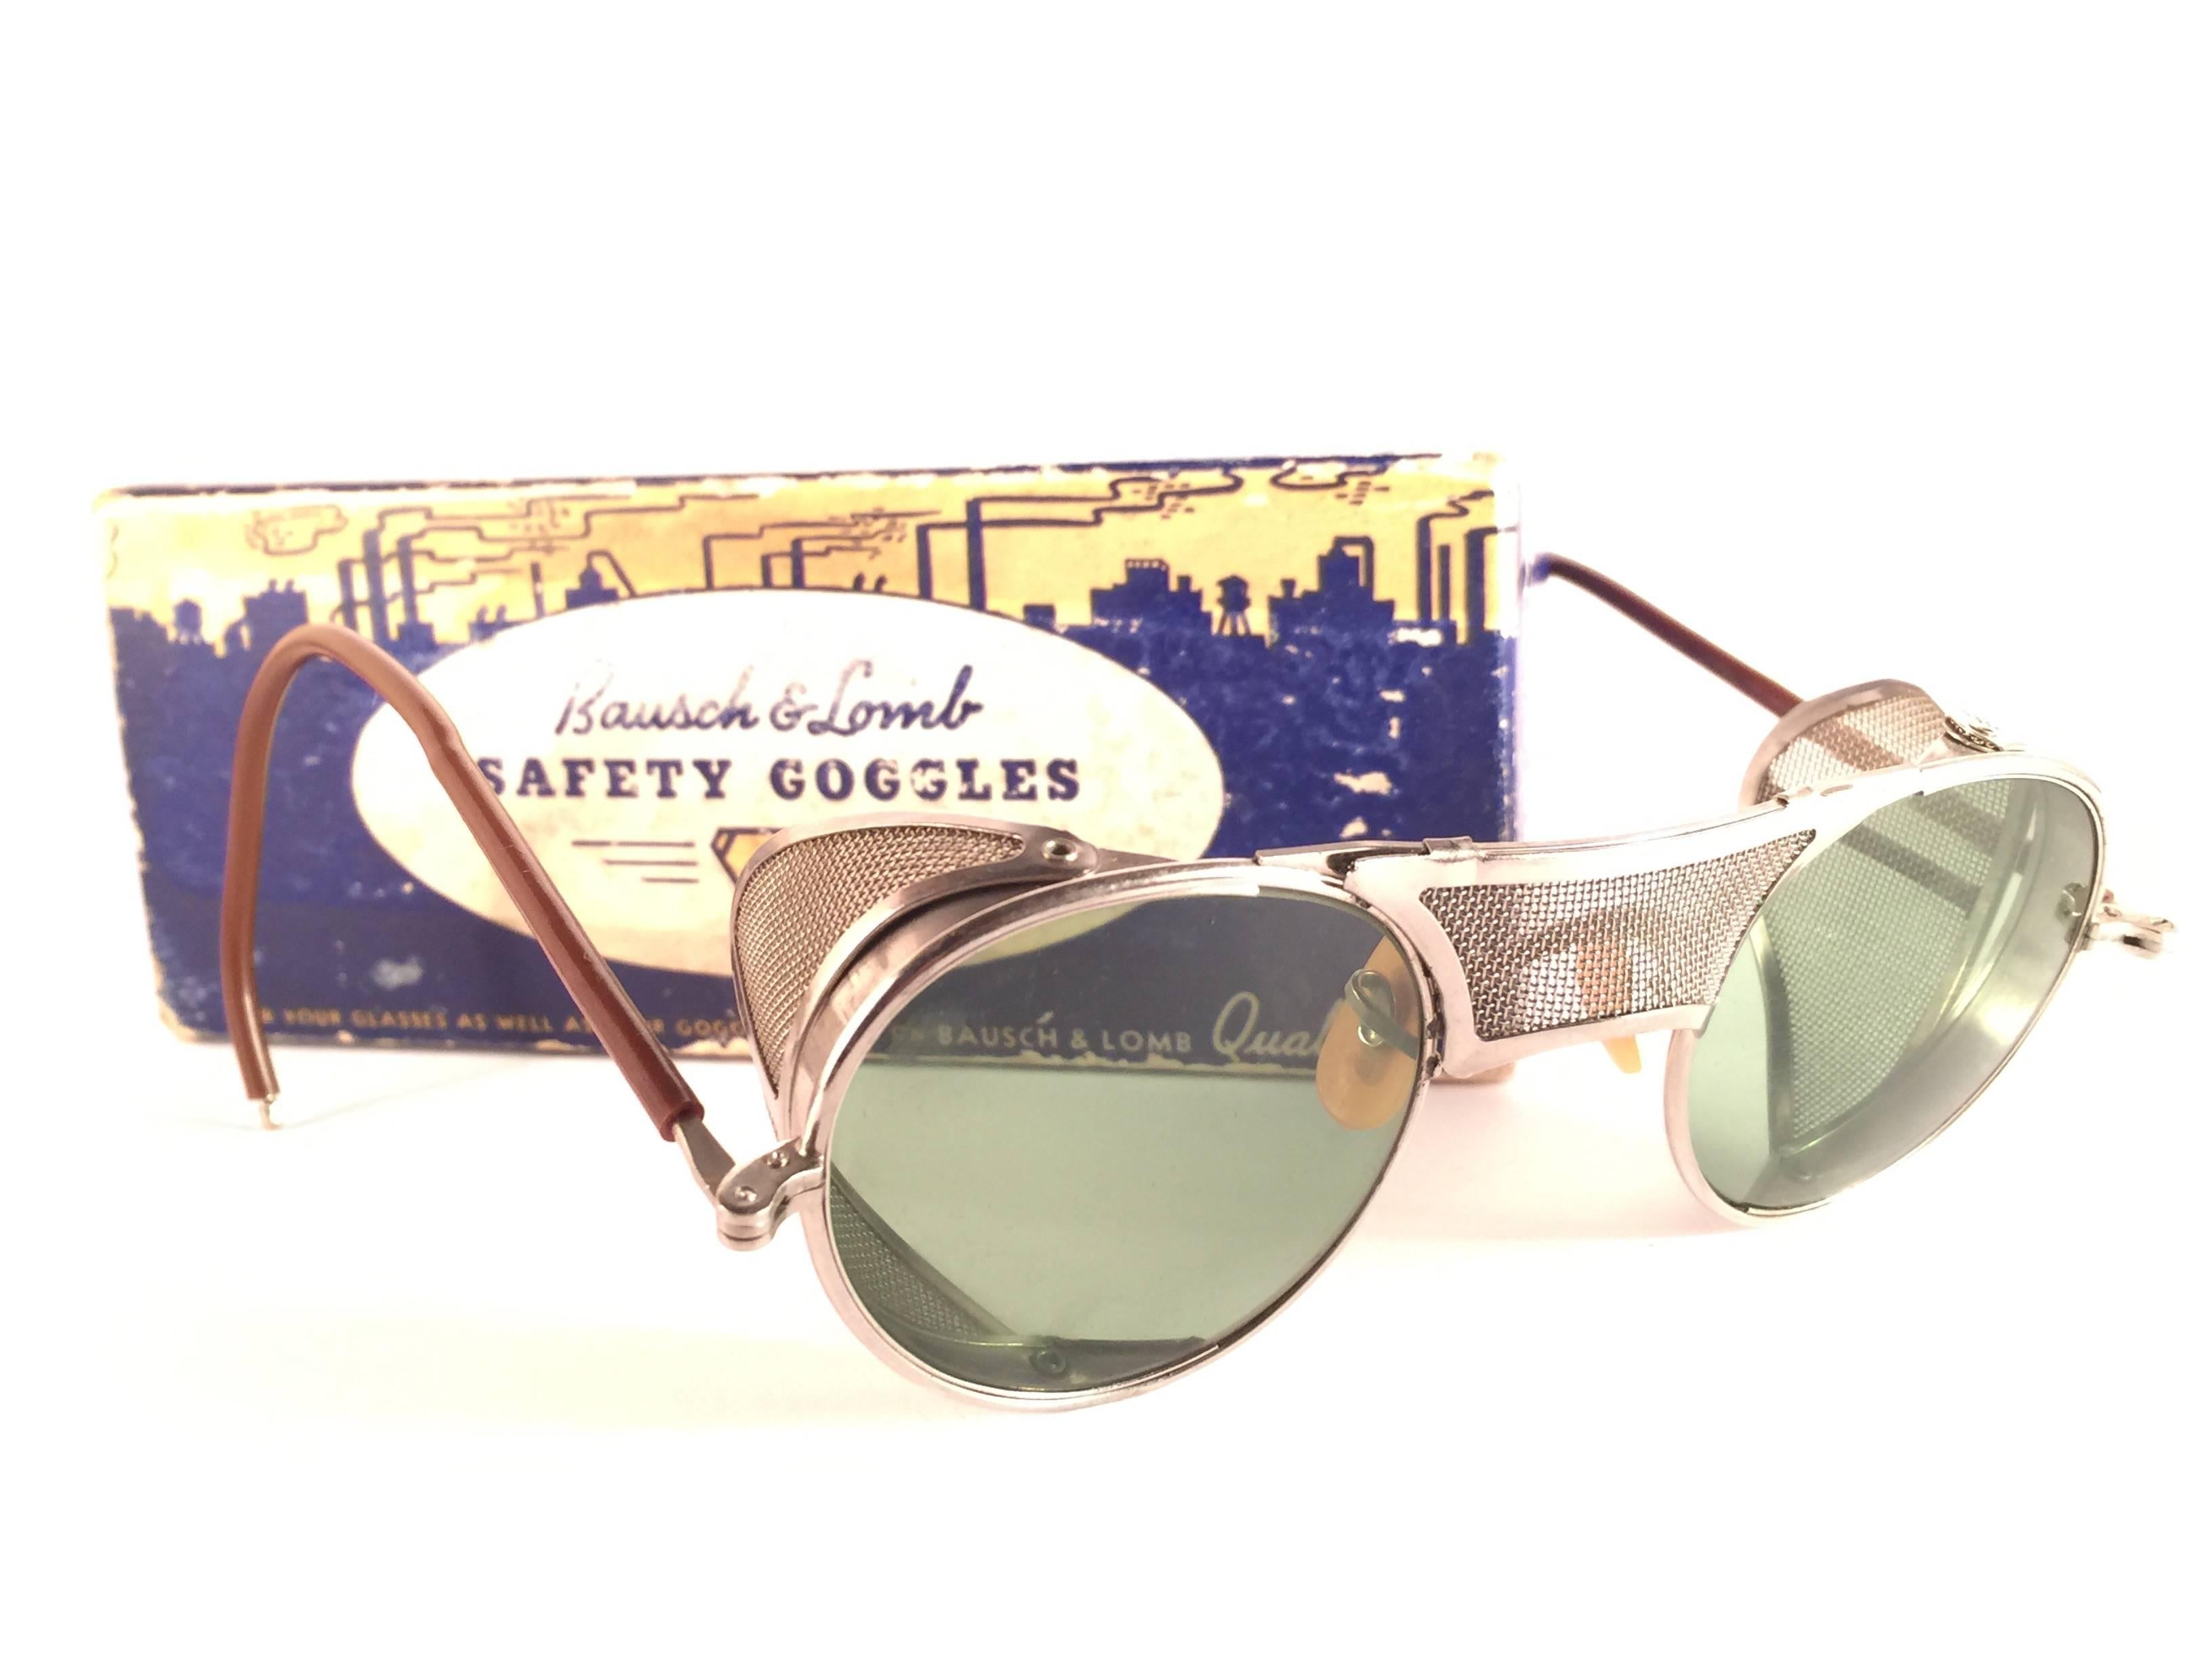 Superb Item!  
1950's Bausch & Lomb Safety Goggles. Folding silver metal side cups and special wrapped temples. Mint true green round lenses.  
A beautiful piece of sunglasses history.